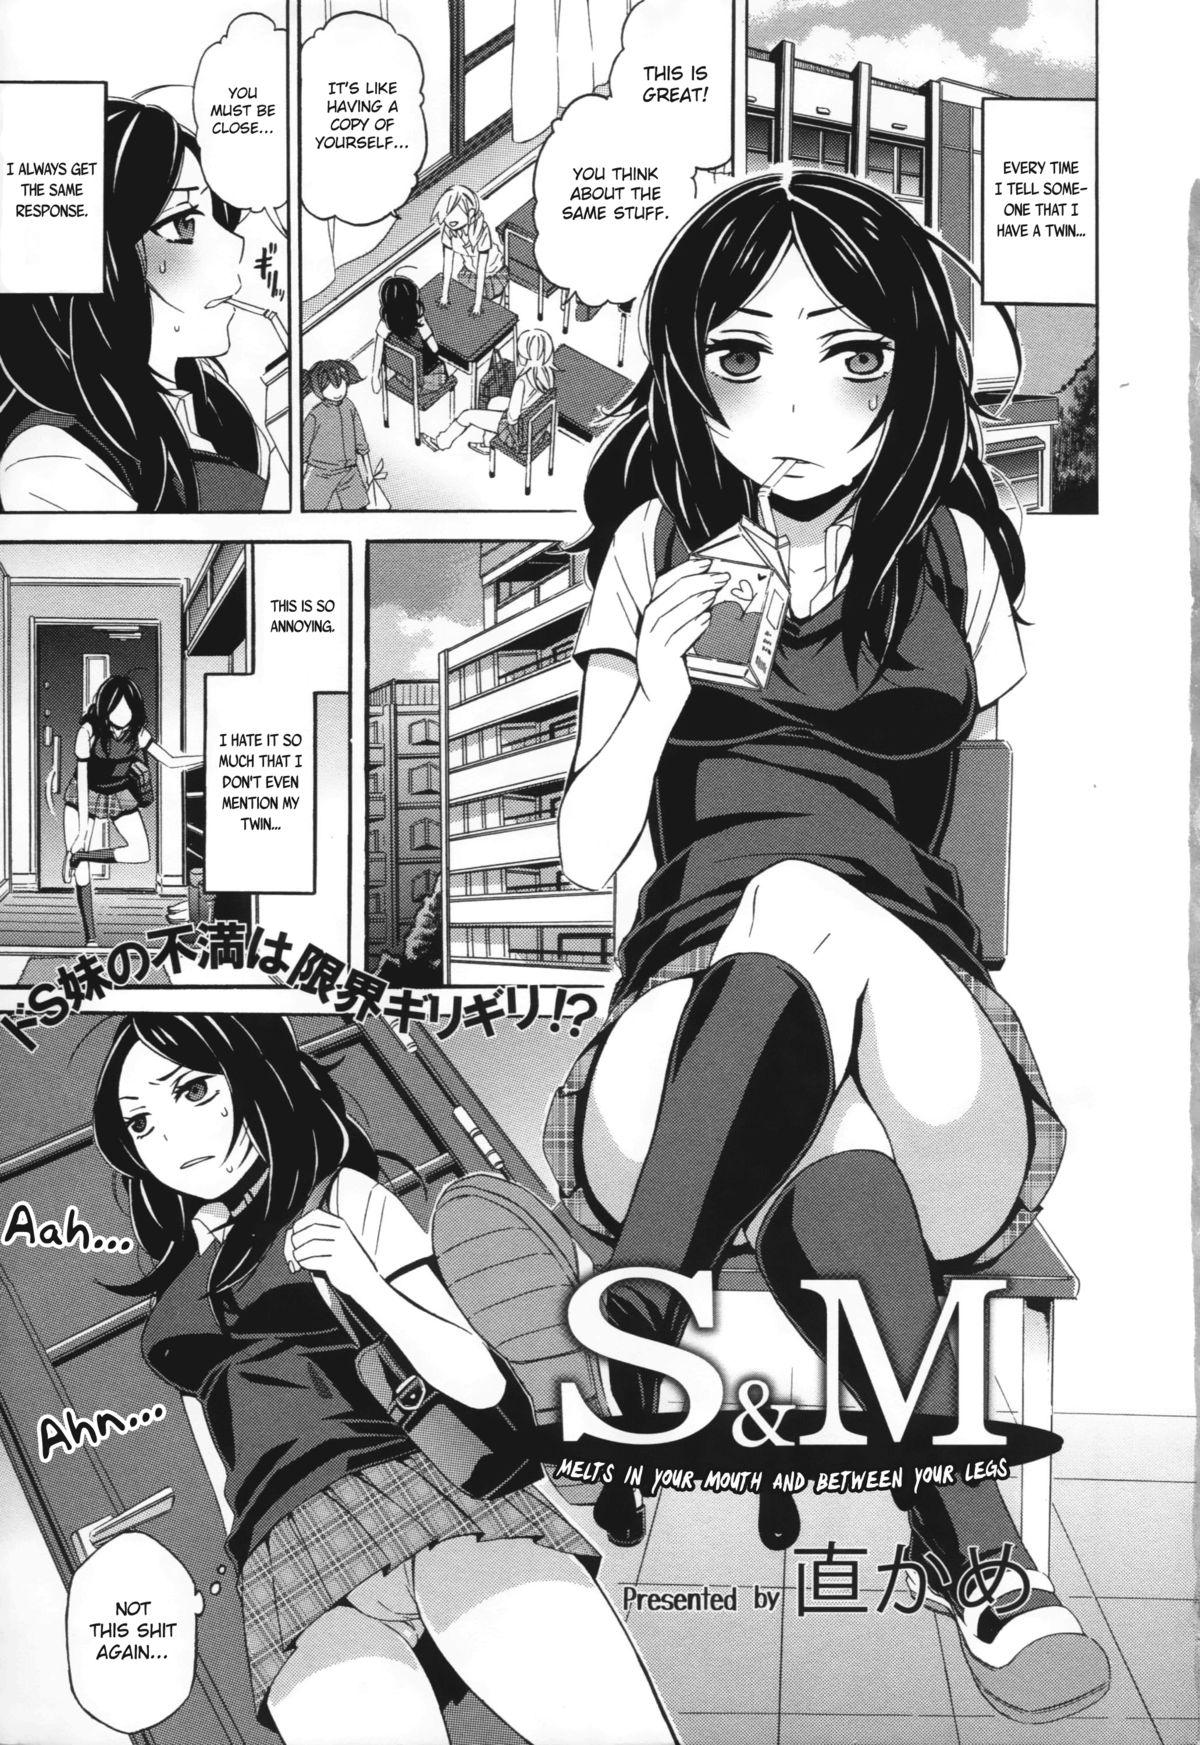 Rubdown [Naokame] S&M ~Okuchi de Tokete Asoko demo Tokeru~ | S&M ~Melts in Your Mouth and Between Your Legs~ (COMIC L.Q.M ~Little Queen Mount~ Vol. 1) [English] [MintVoid] Analsex - Picture 1